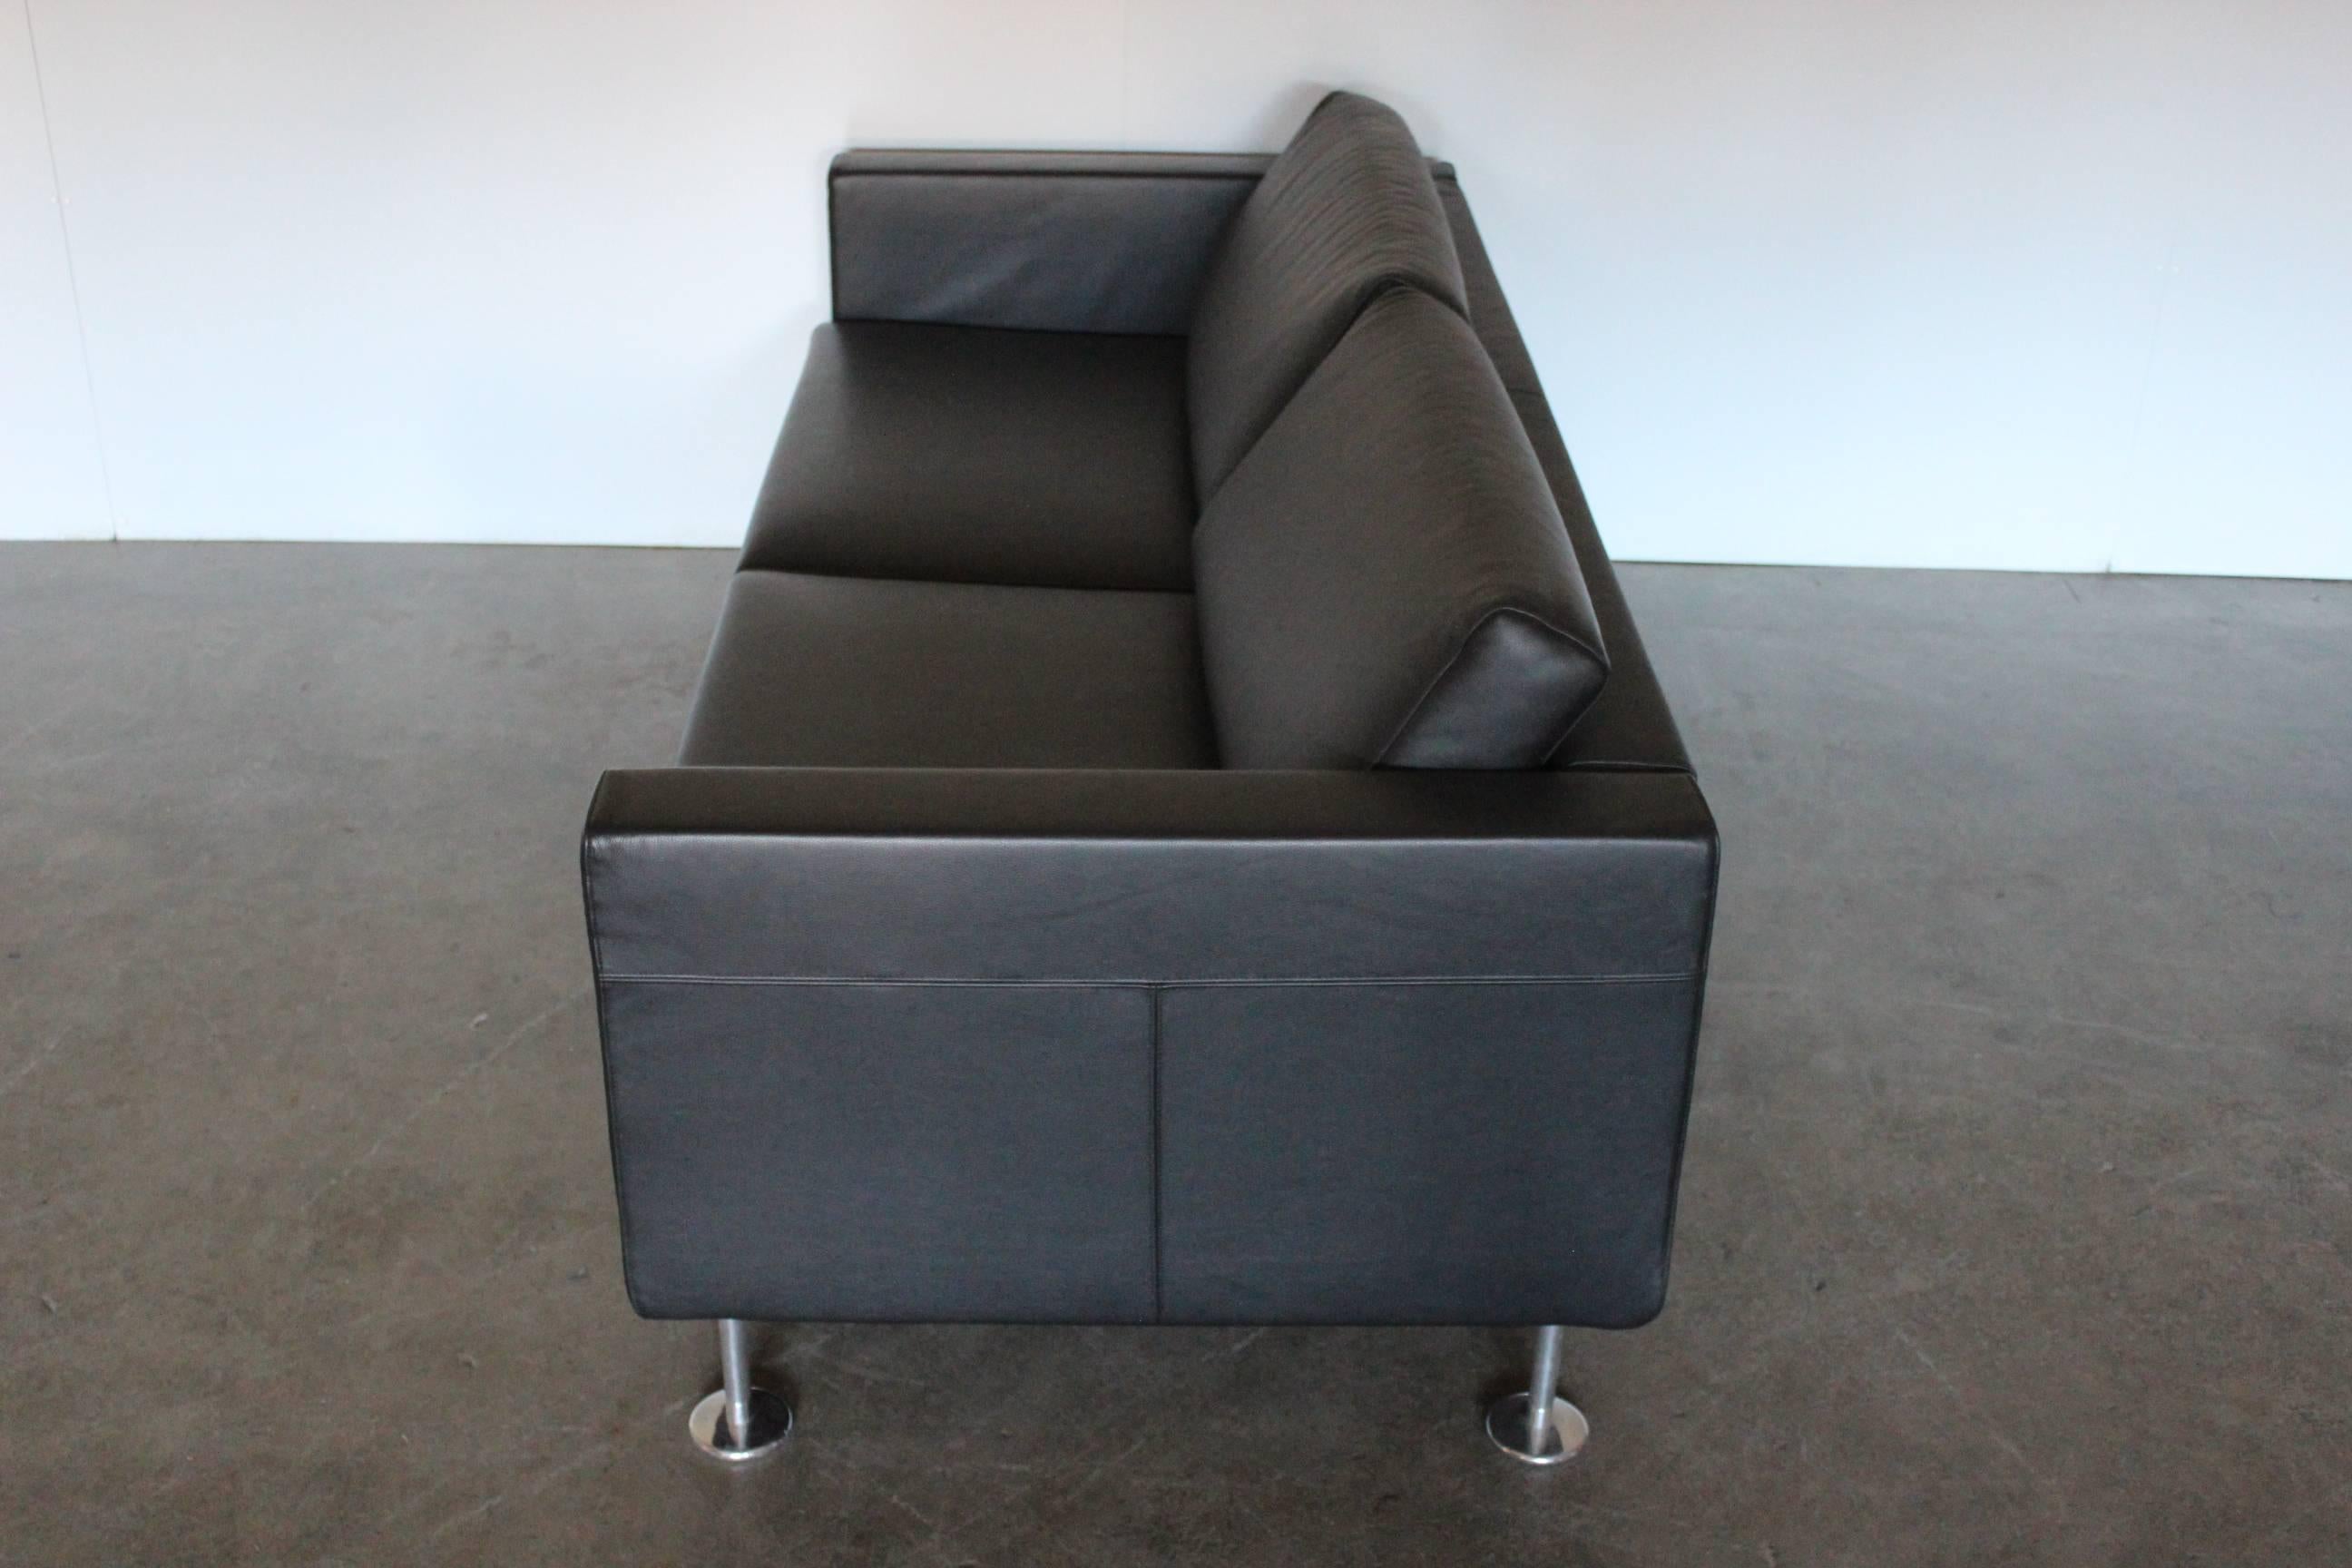 Vitra “Park” Three-Seat Sofa in Jet Black Leather by Jasper Morrison In Excellent Condition In Barrowford, GB